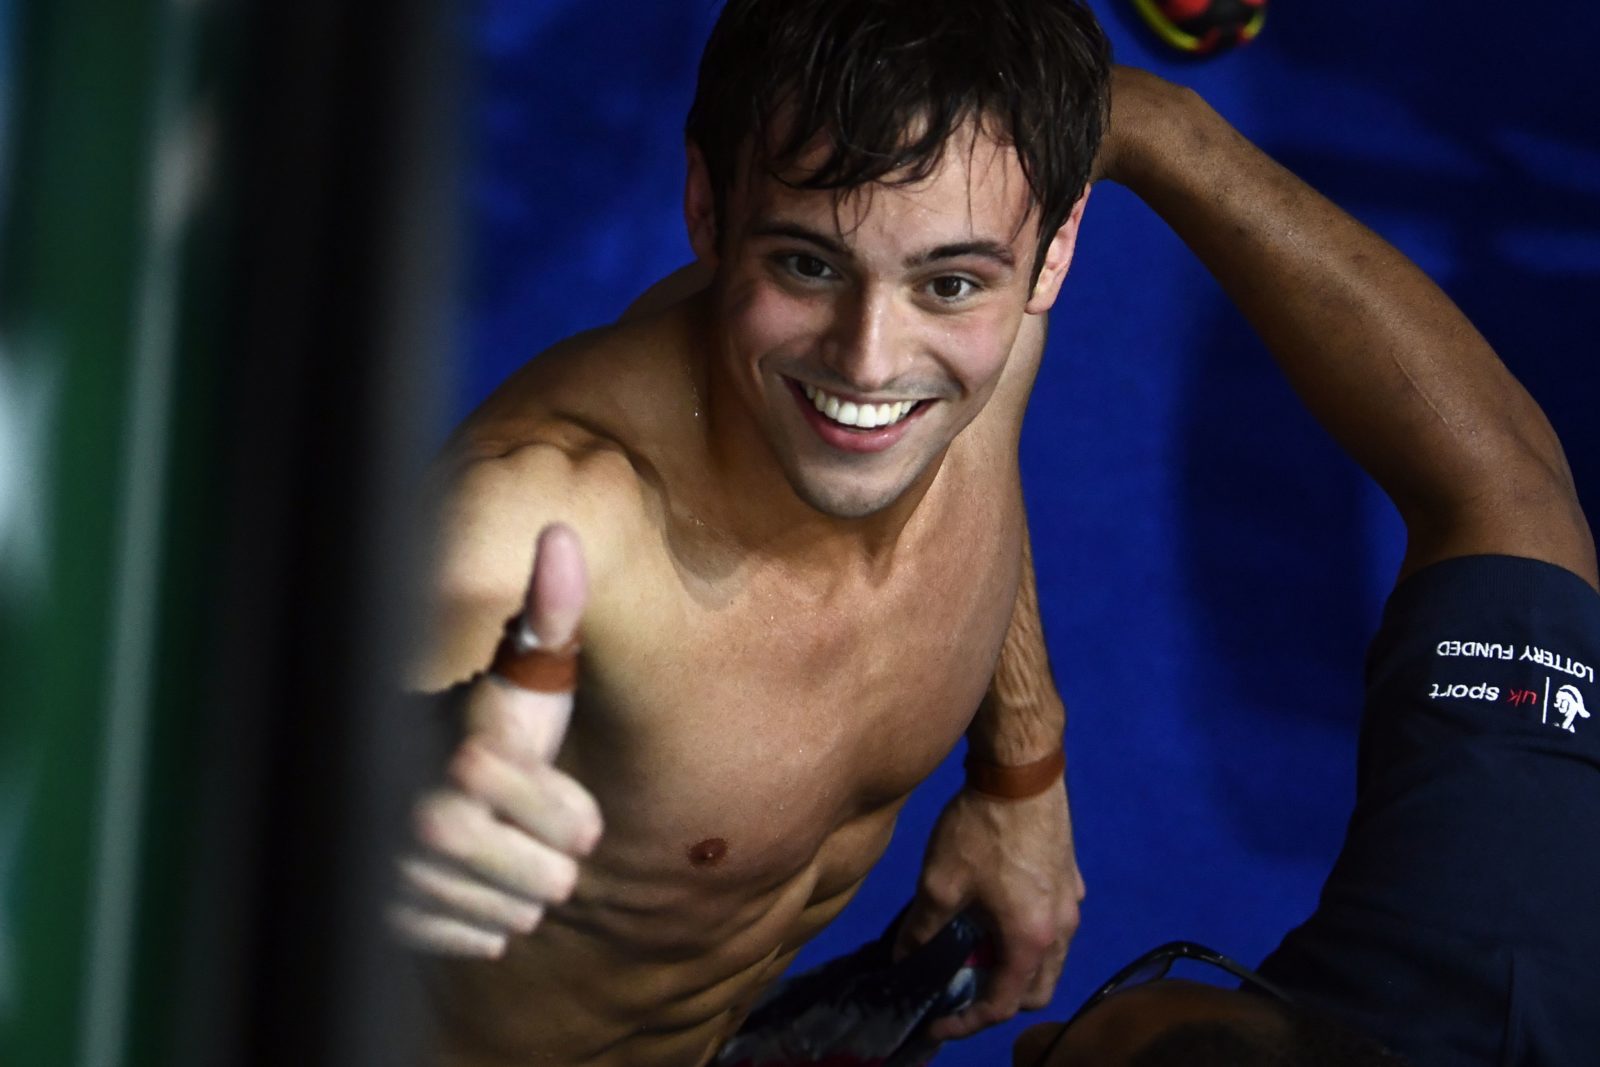 Jul 29, 2021 - tom daley is a well known and popular british diver and tele...